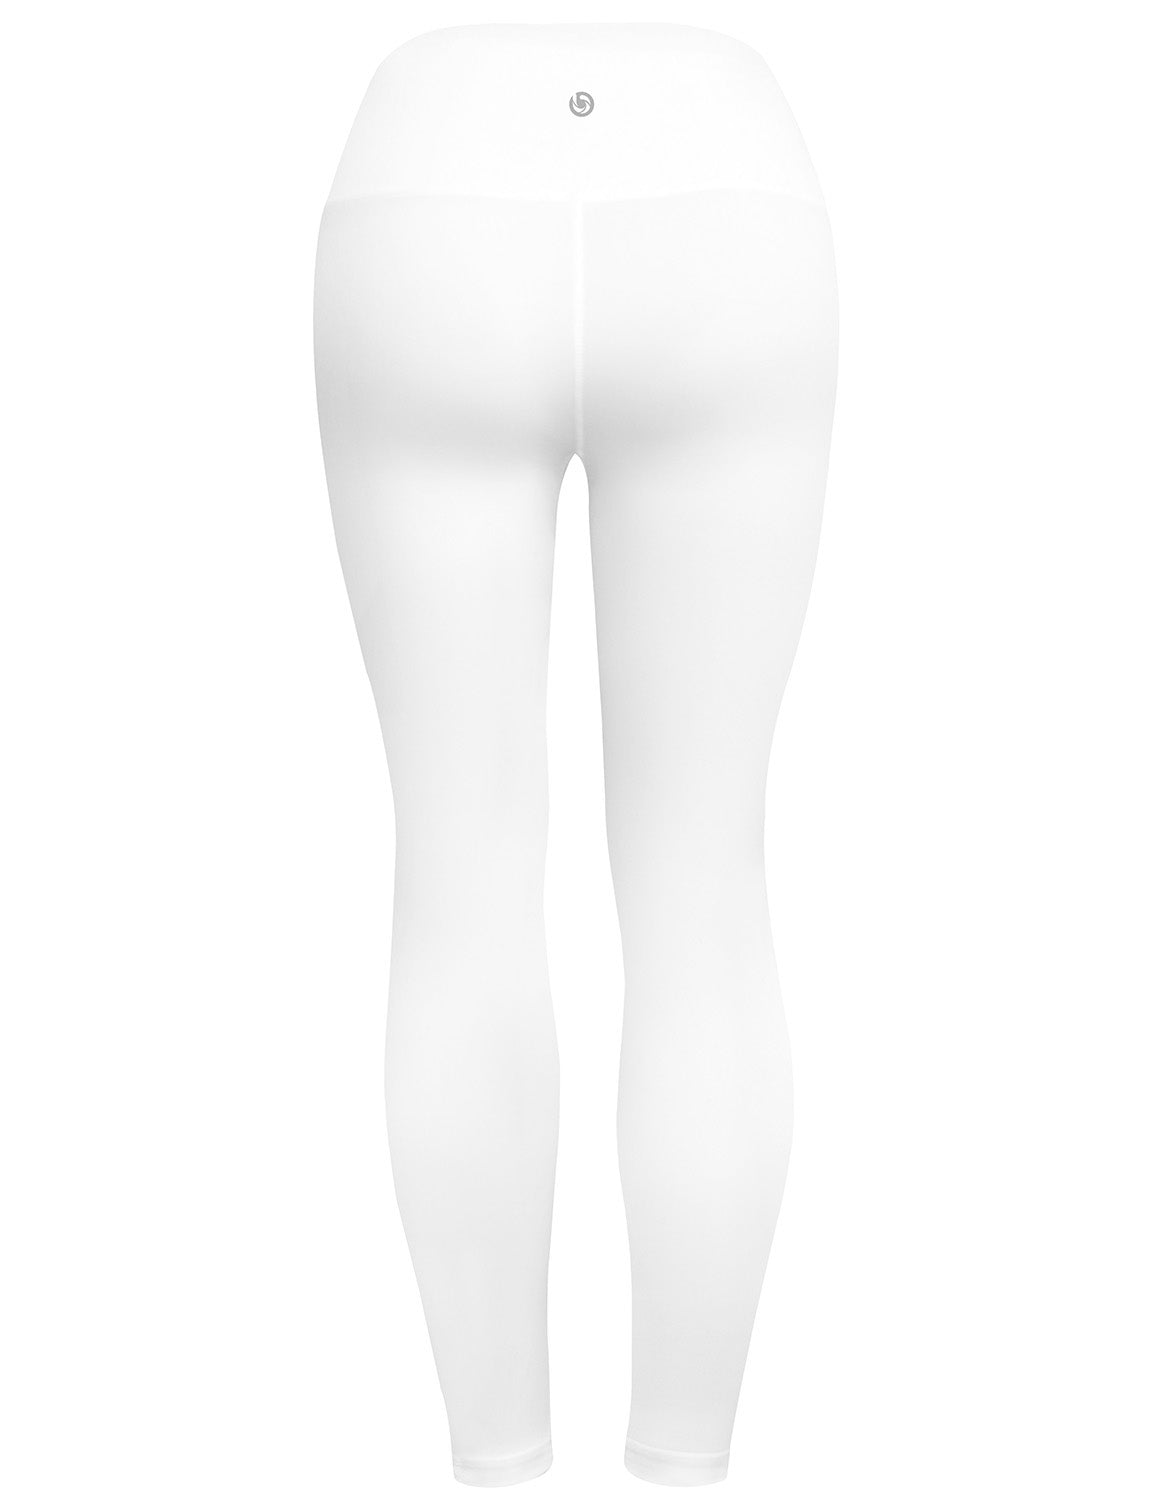 High Waist Biking Pants white 75%Nylon/25%Spandex Fabric doesn't attract lint easily 4-way stretch No see-through Moisture-wicking Tummy control Inner pocket Four lengths